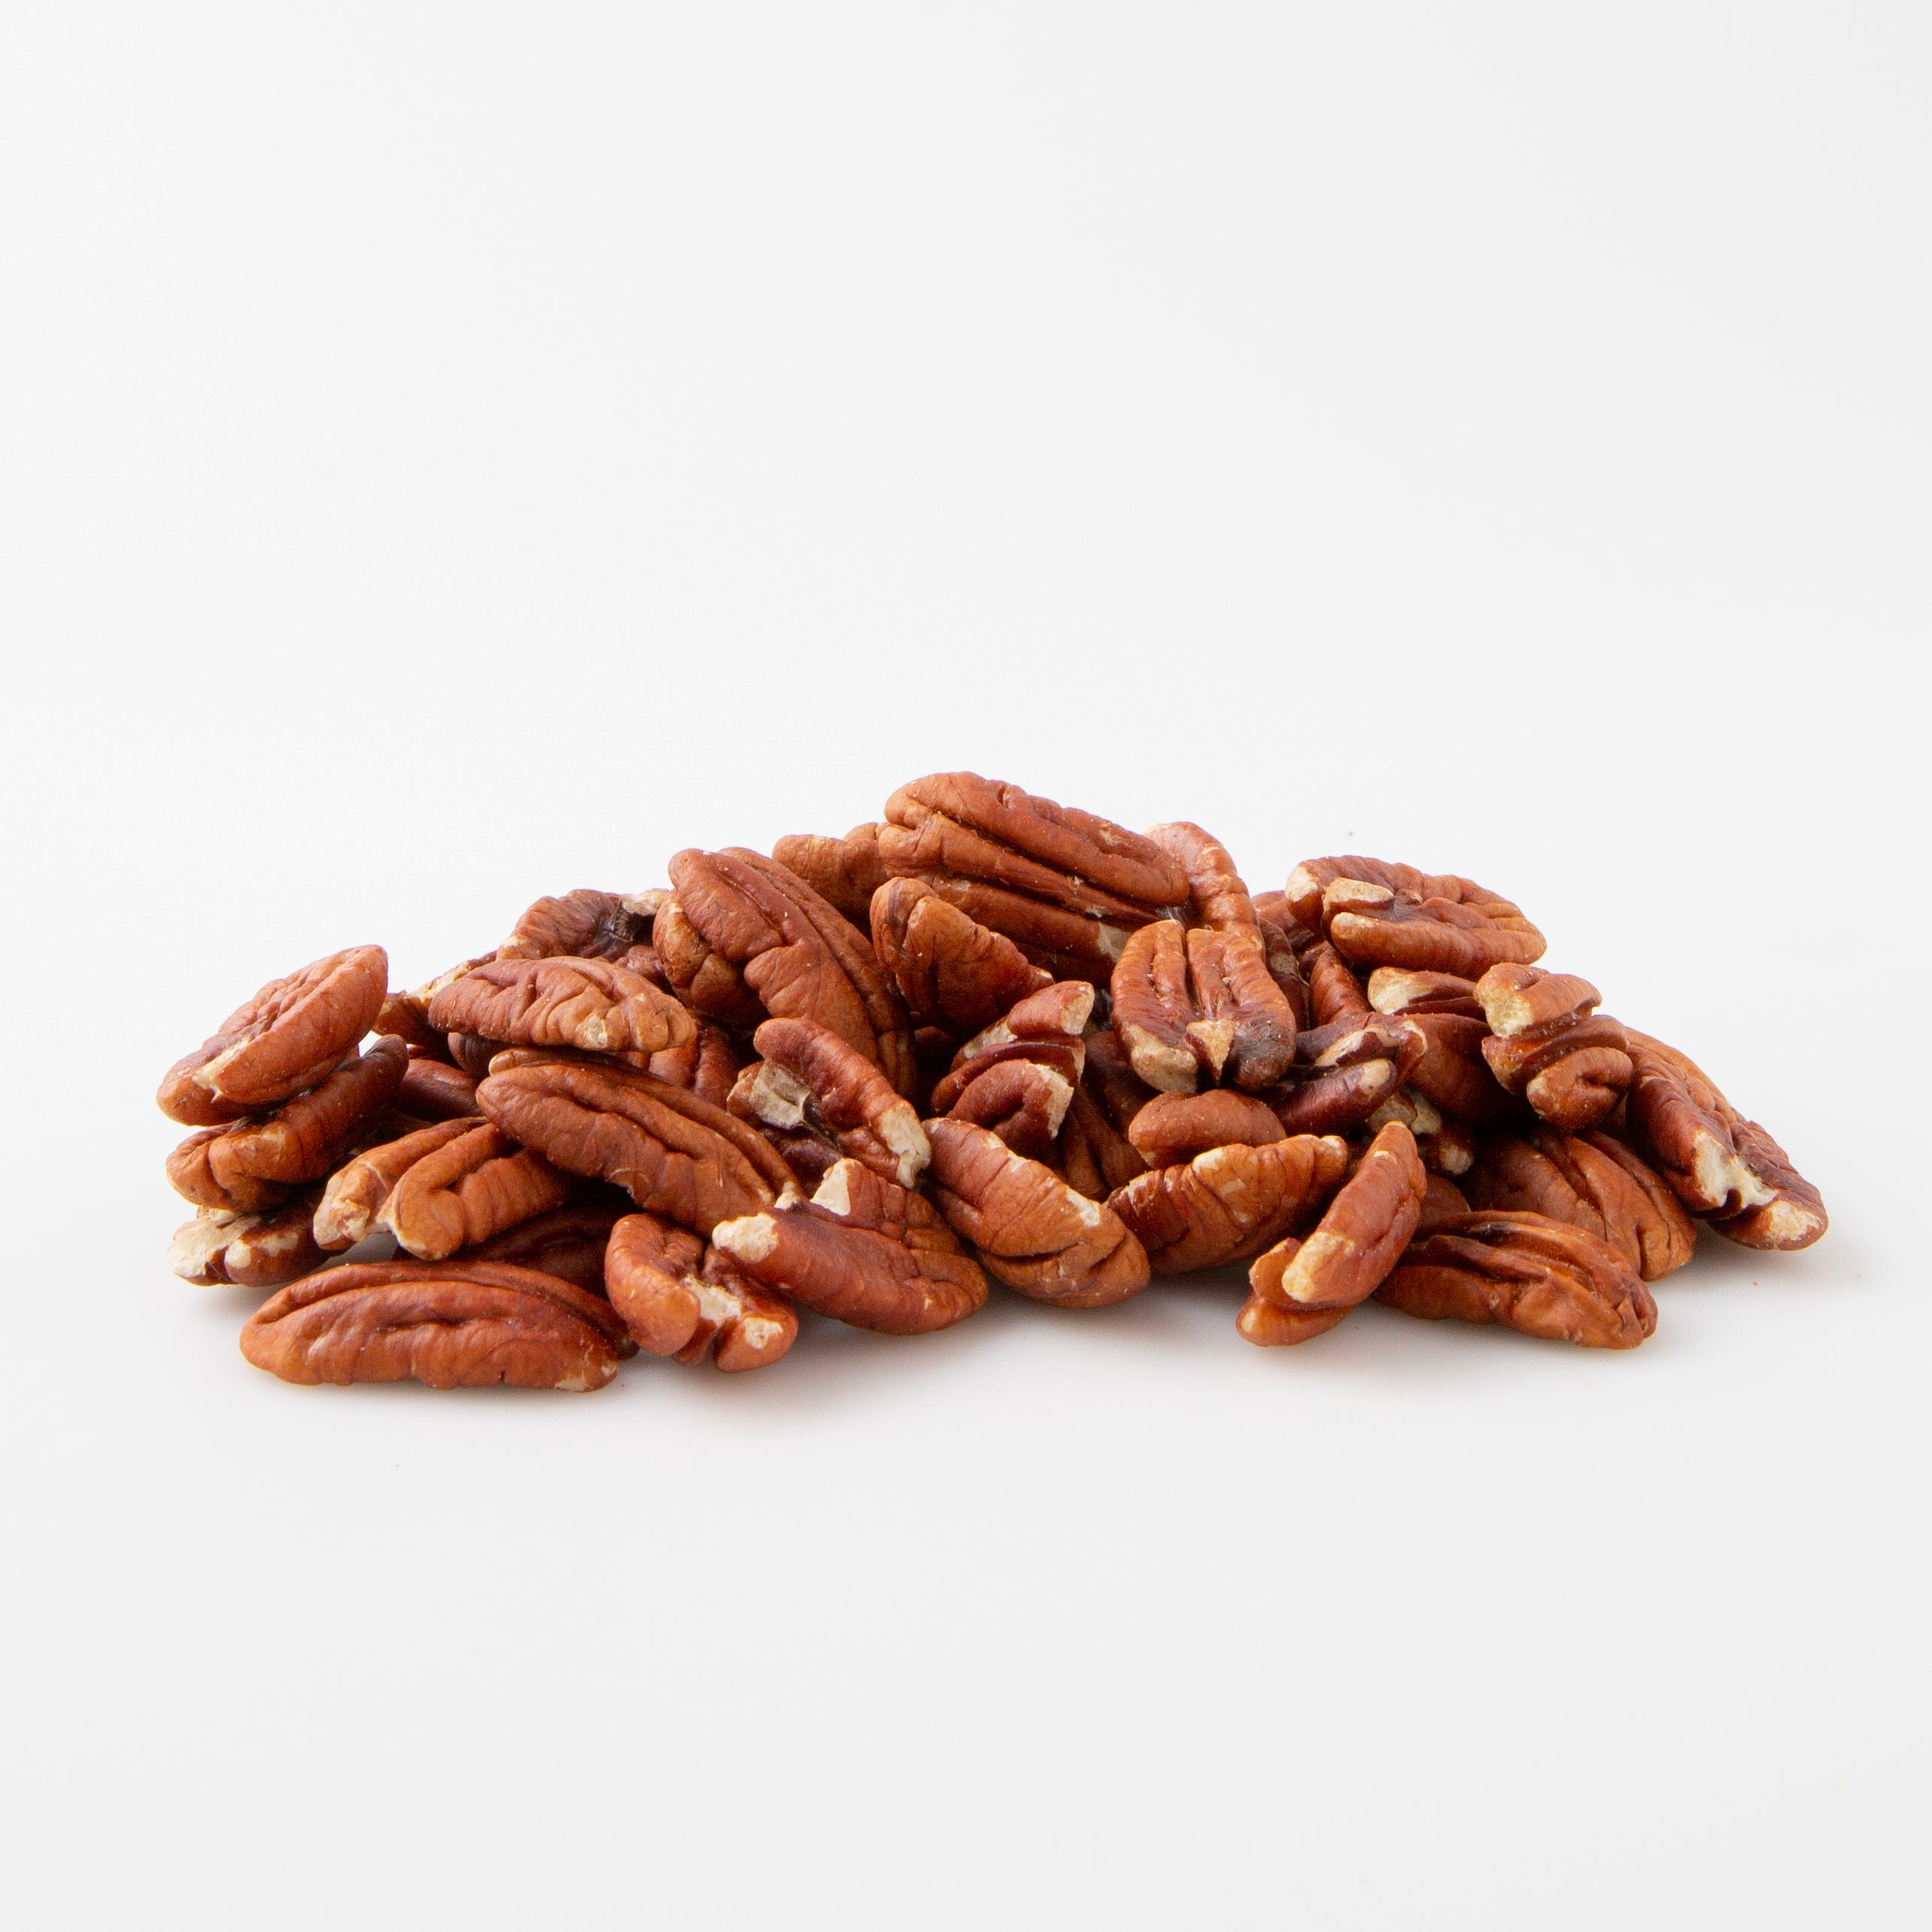 Raw Pecan Nuts (Raw Nuts) Image 1 - Naked Foods